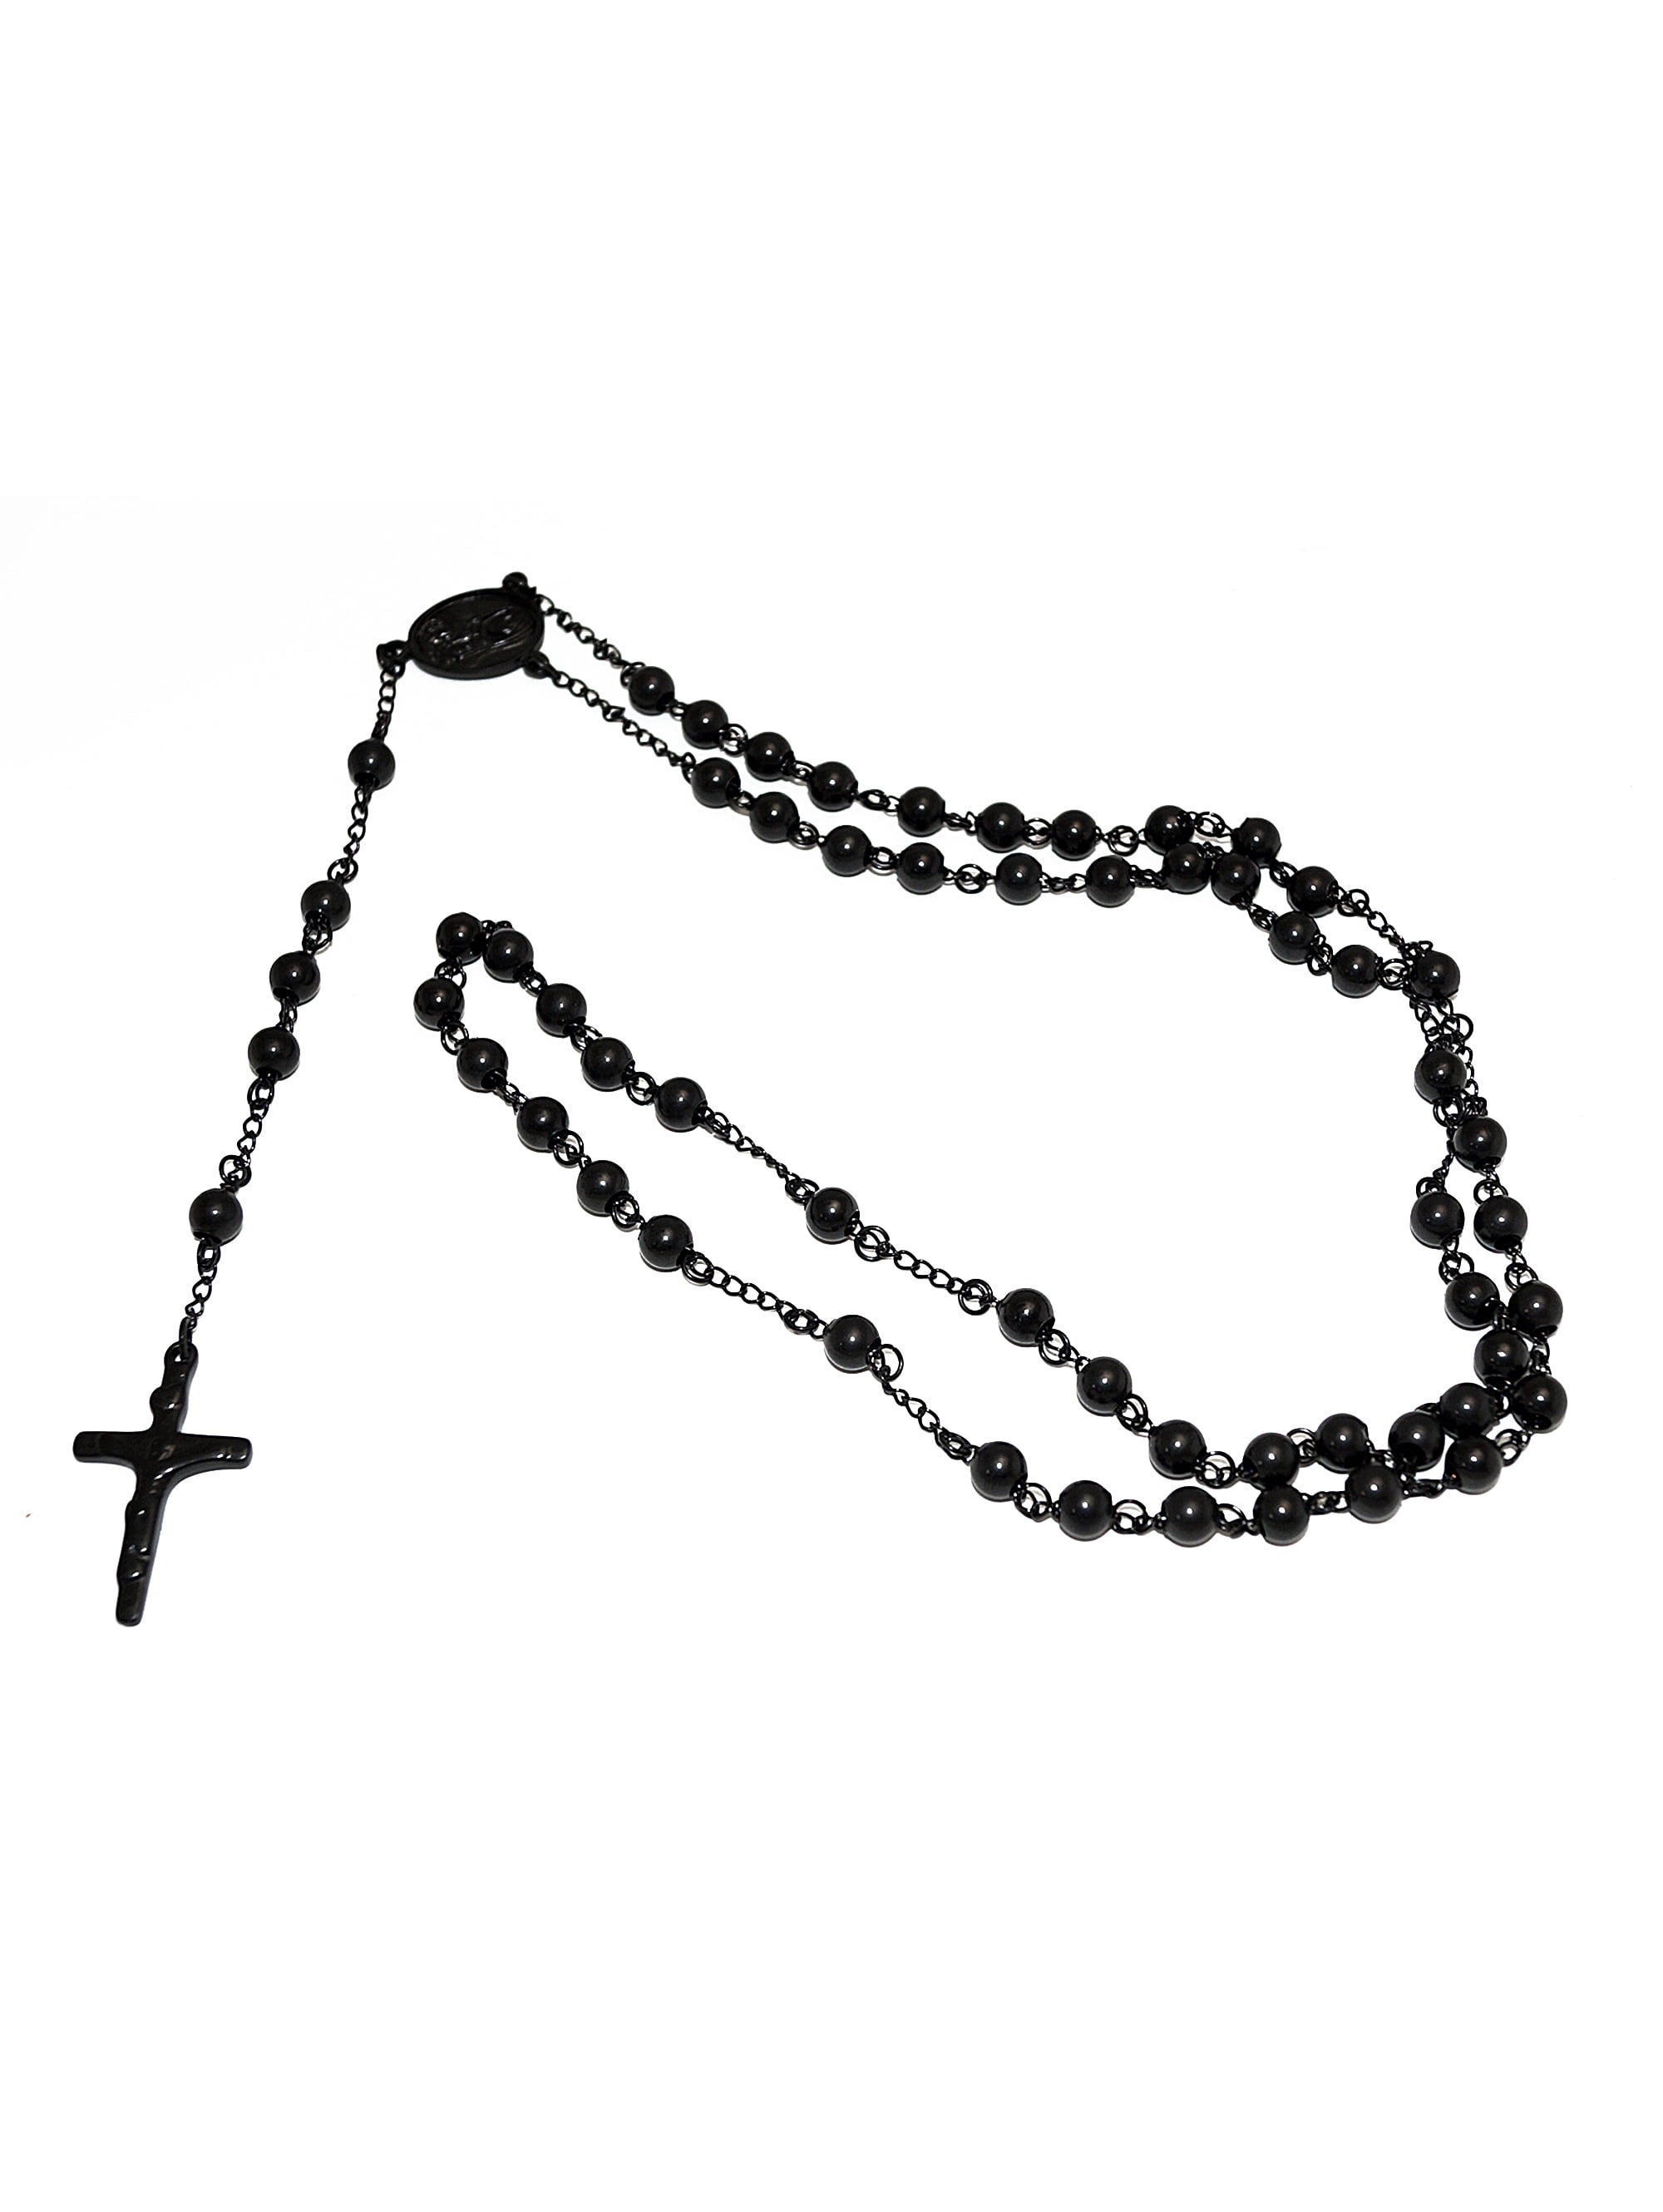 Buy Black Rosary 6mm Bead Chain with Jesus, Cross Coin Pendant Religious  Necklace Christ Jewelry at Amazon.in